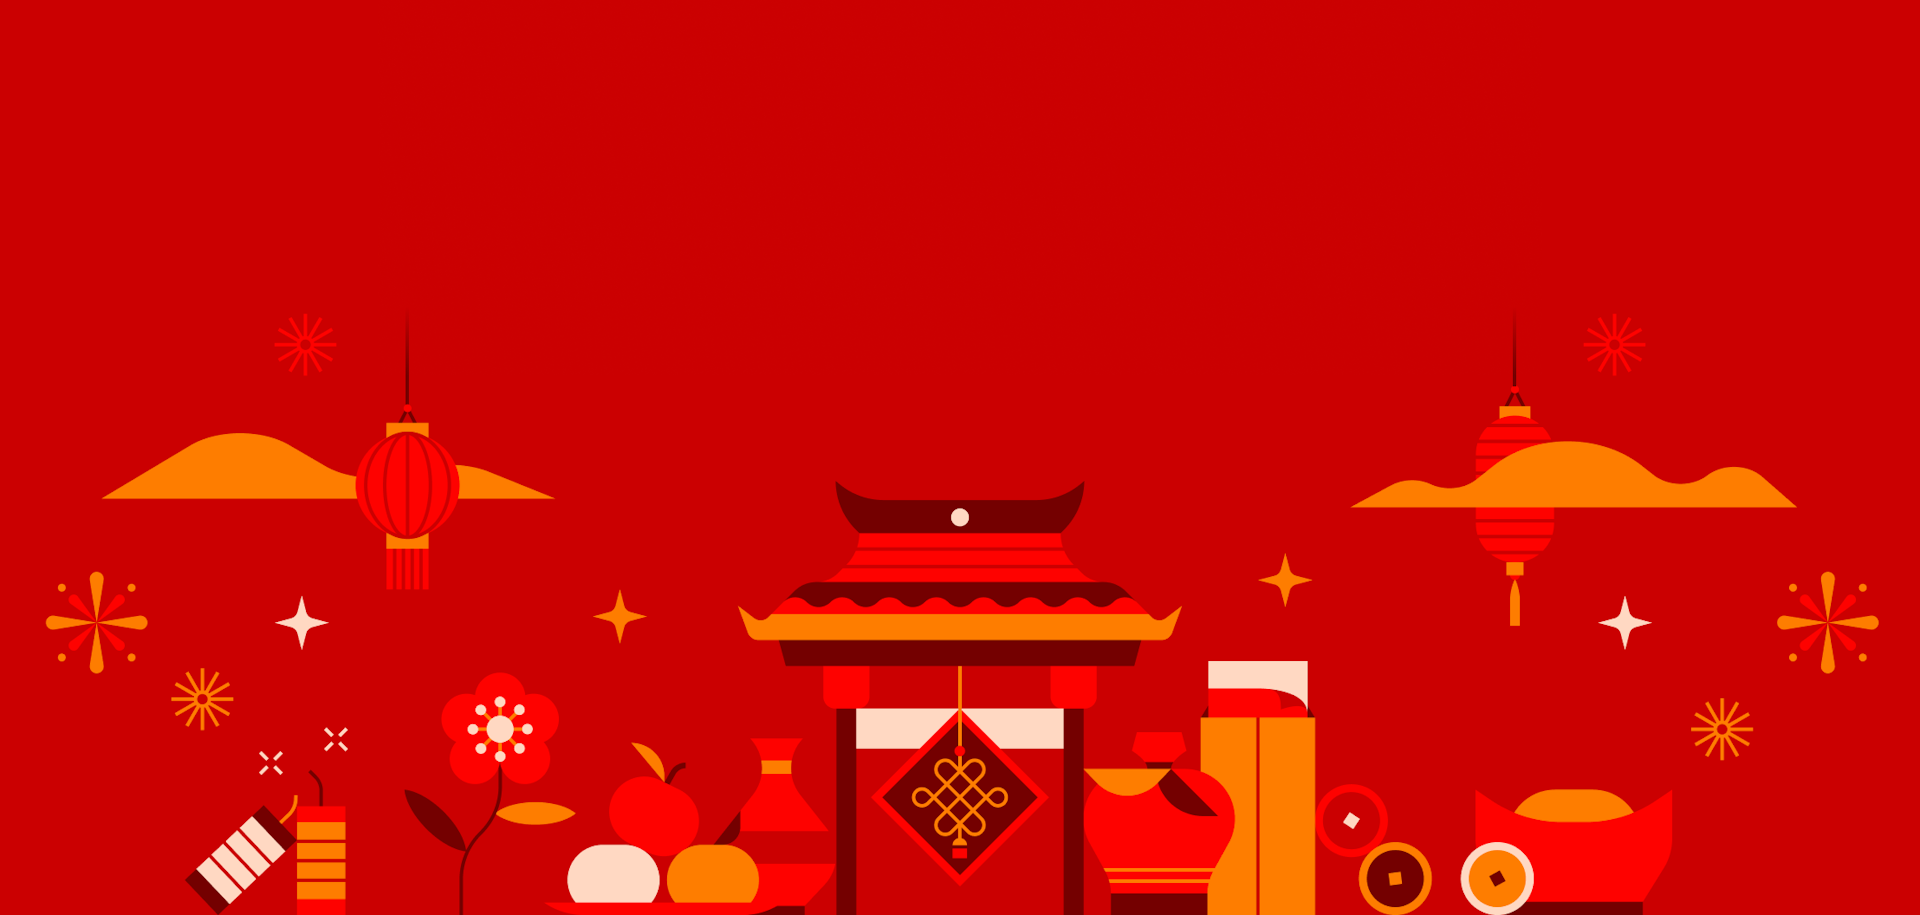 Chinese New Year 2024 – Year of the Dragon